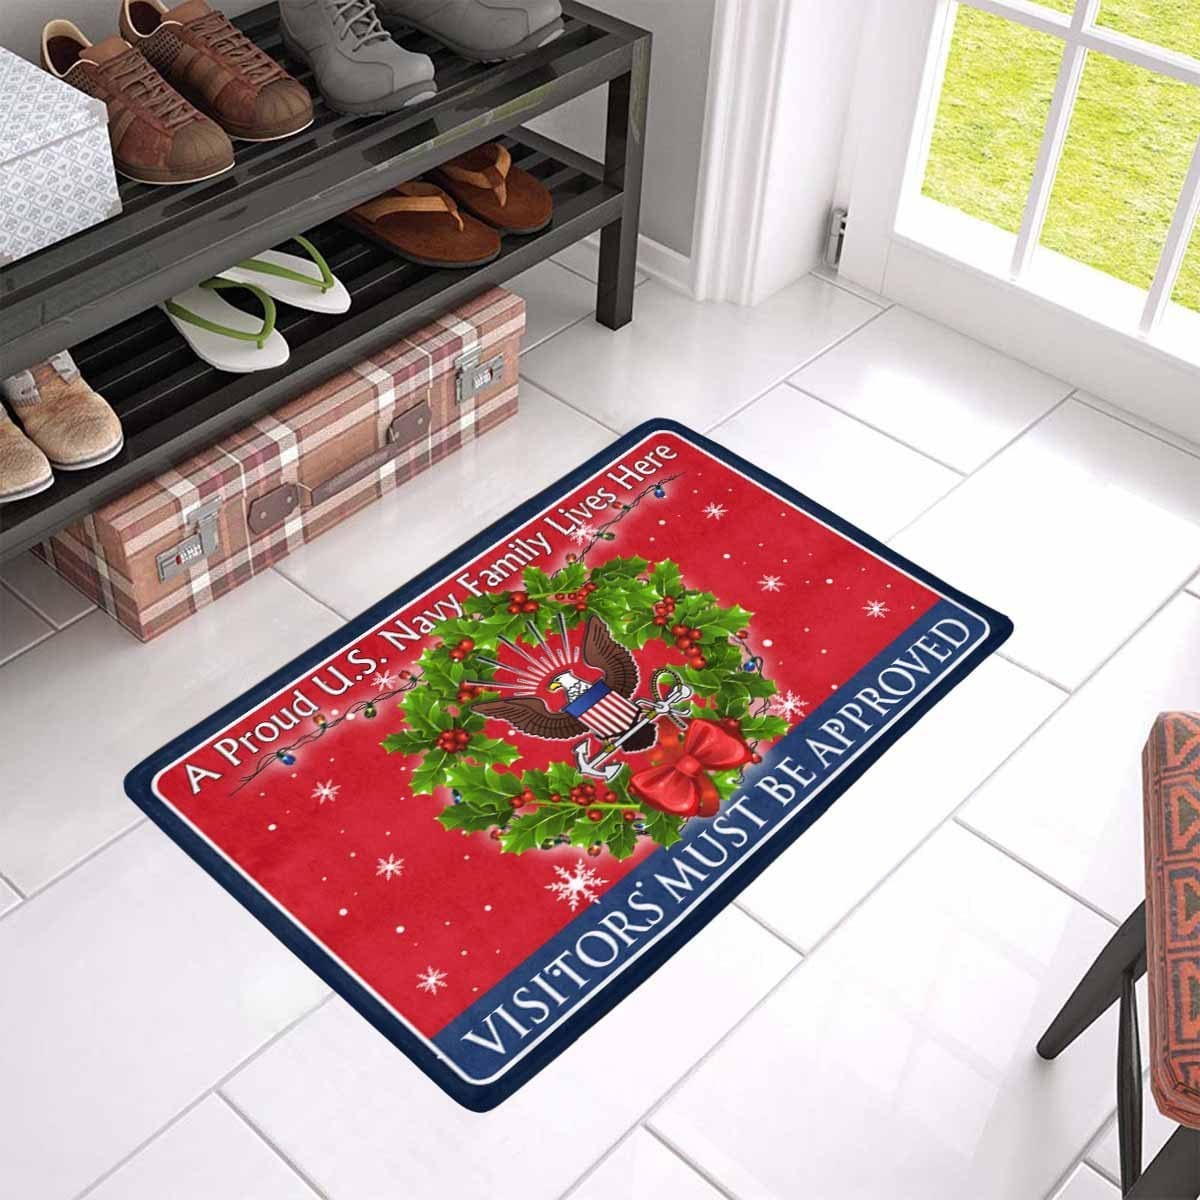 US Navy Logo A Proud Military Family Lives Here - Visitor must be approved - Christmas Doormat-Doormat-Navy-Rate-Veterans Nation